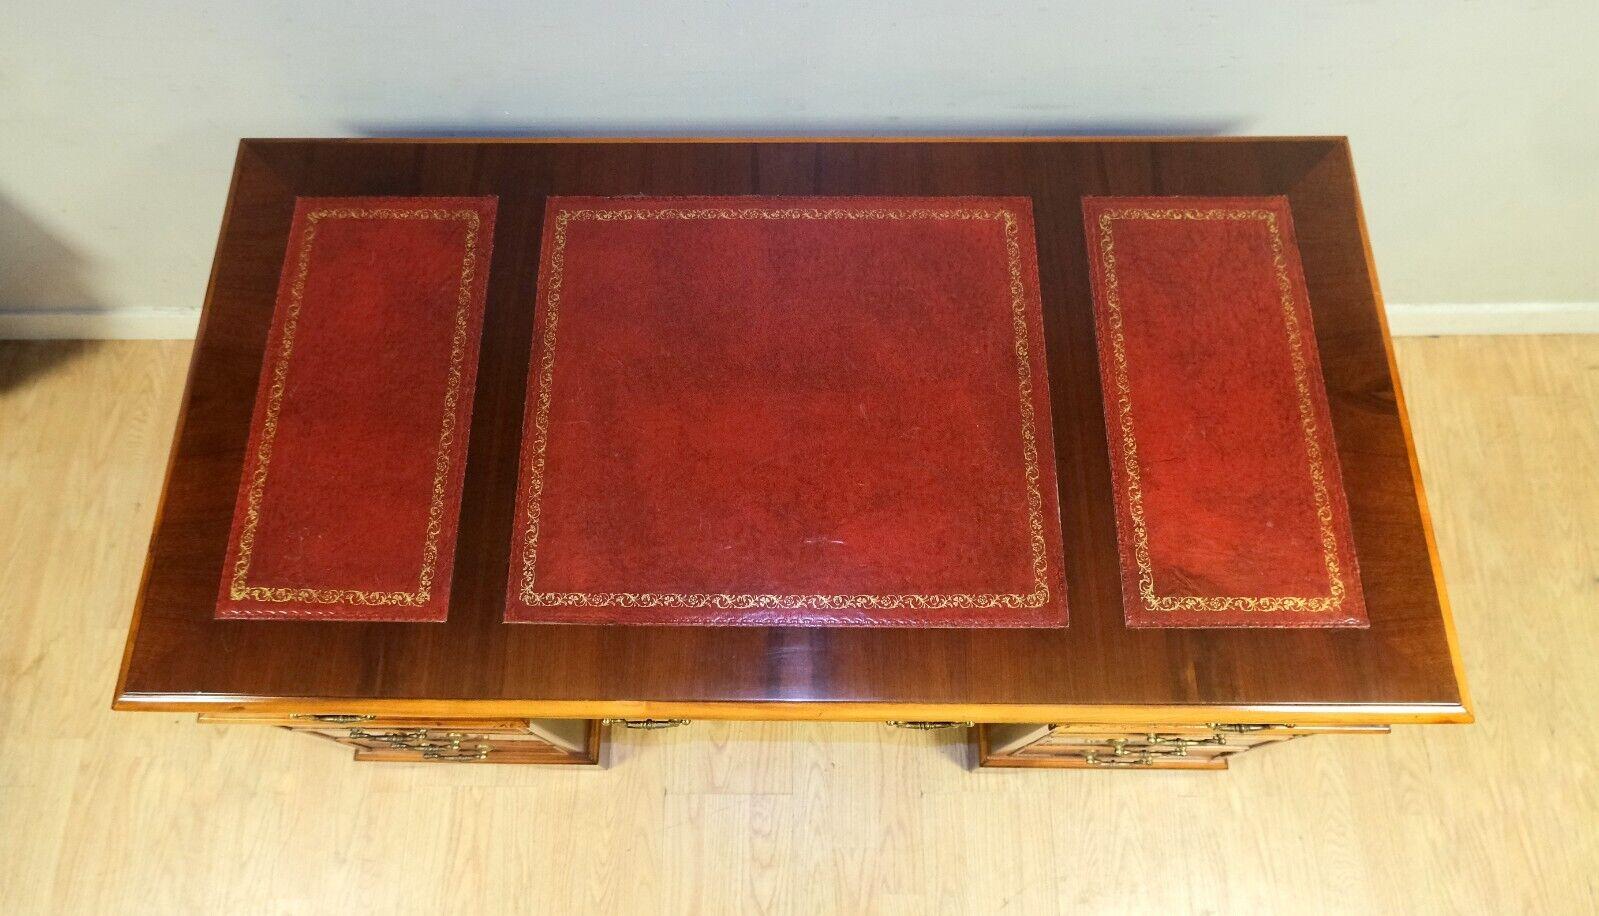 LATE 20TH C WARING & GILLOW PEDESTAL DESK WiTH GOLD TOOLED RED LEATHER TOP  For Sale 1